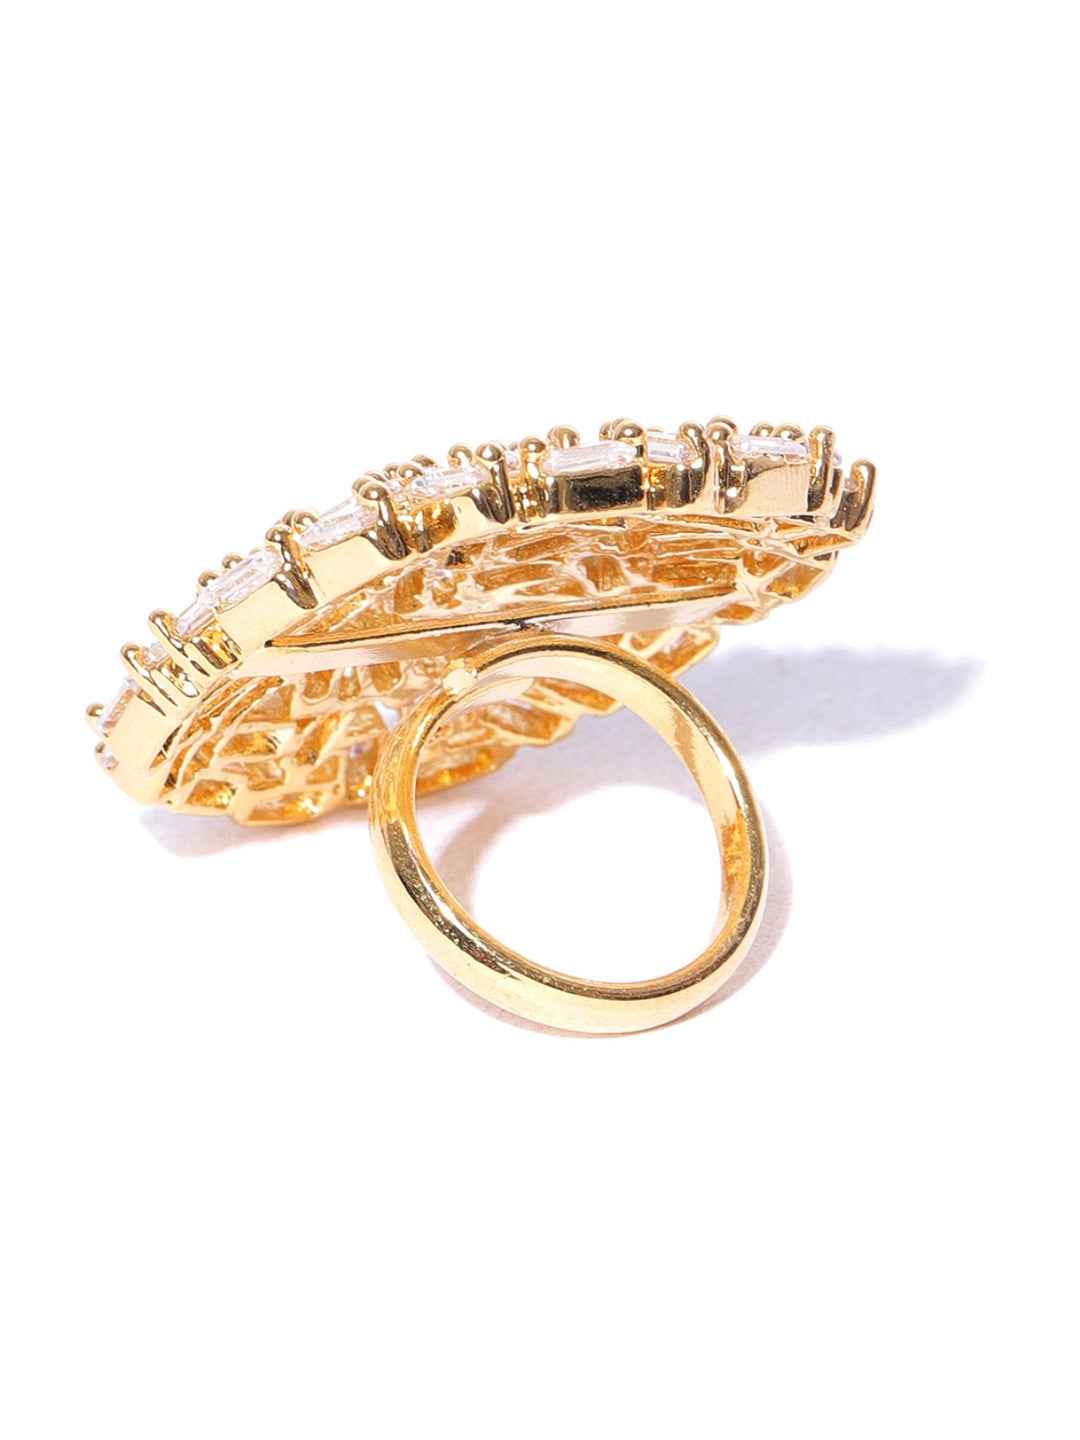 Sparkling GoldPlated Oval Shaped American Diamond Ring For Women And Girls